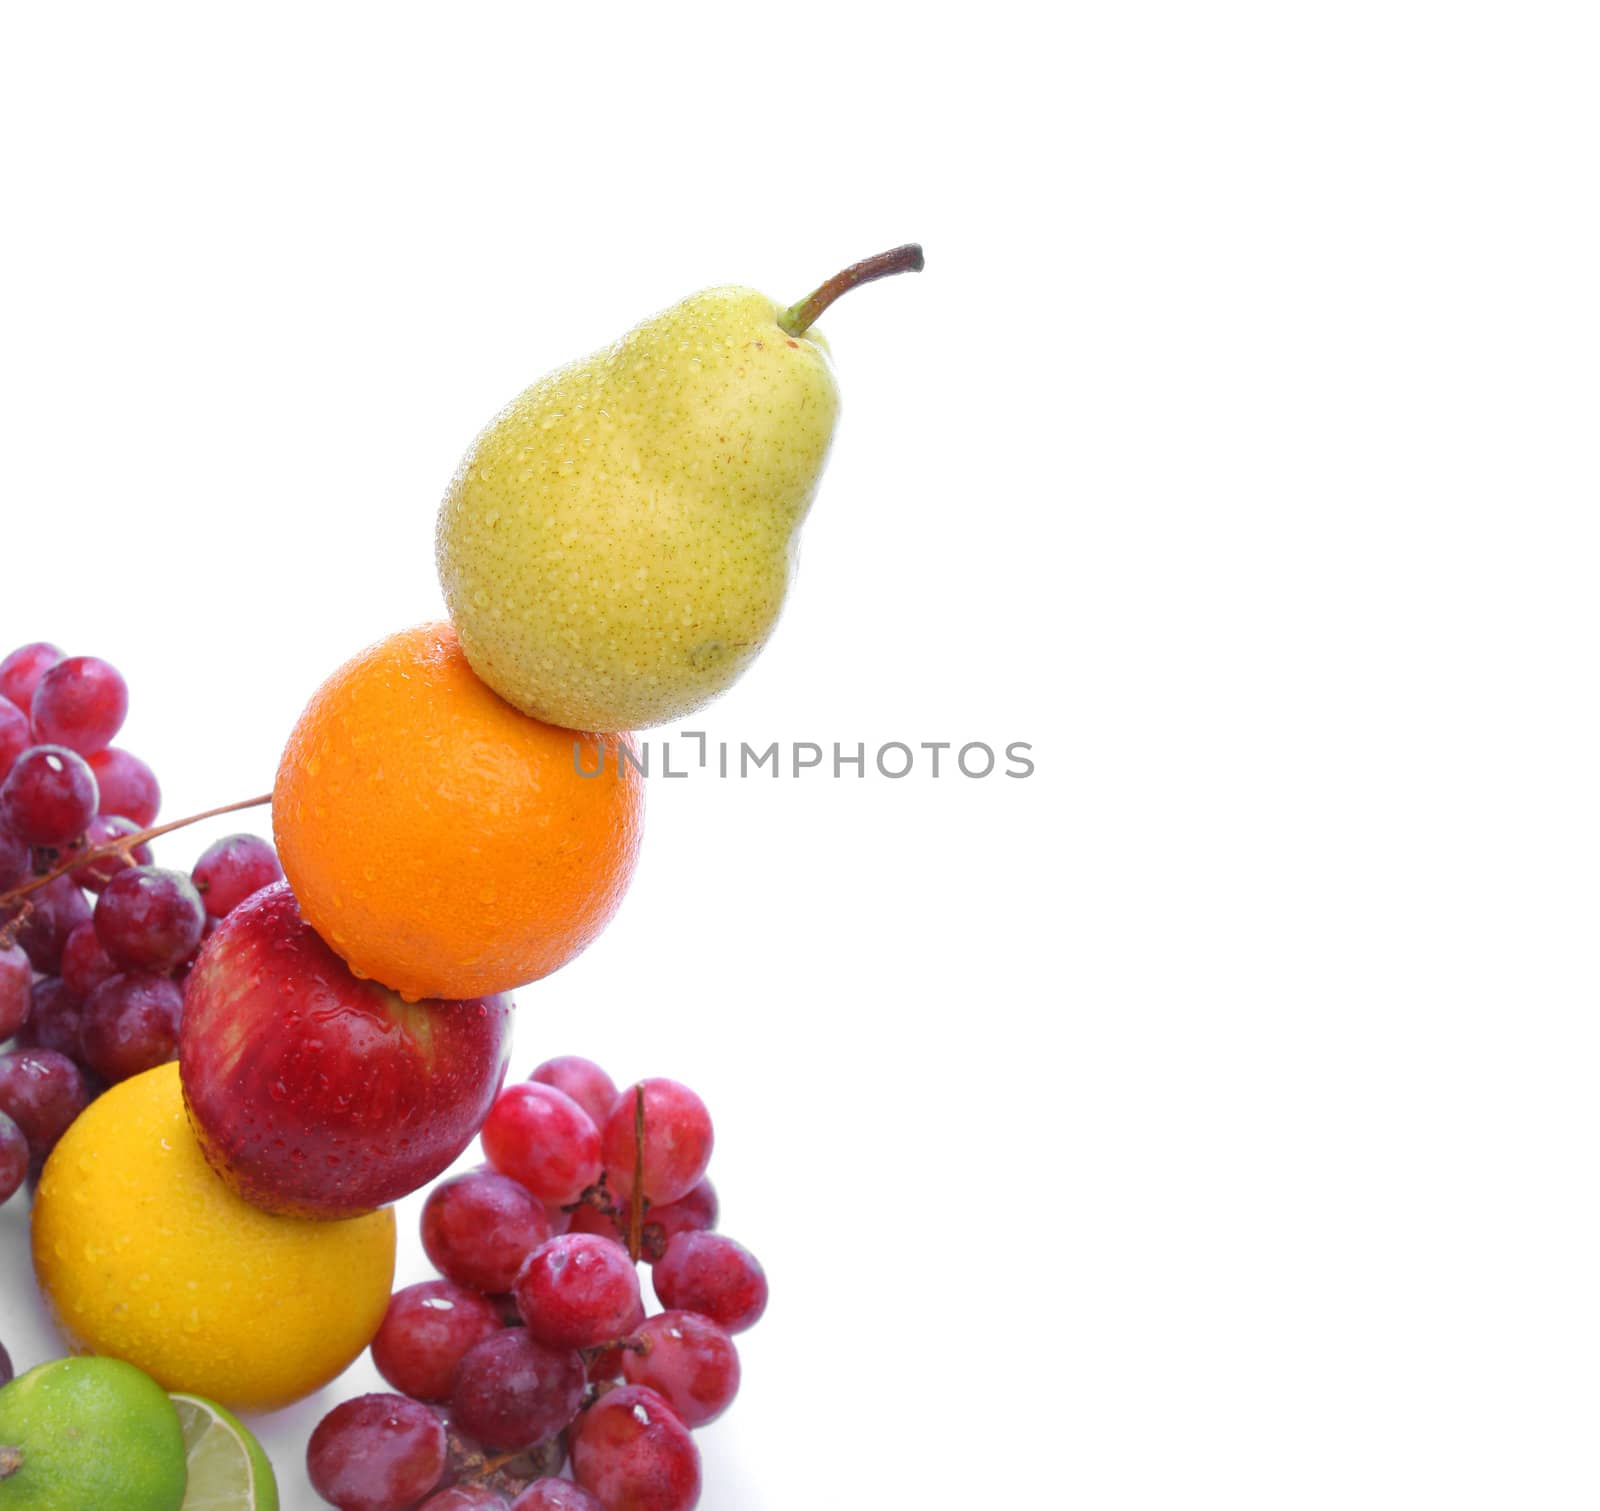 Pear, orange, apple and grapefruit totem with water drops with some grapes on the floor on white background. Look for more fresh fruits and vegetables at my gallery